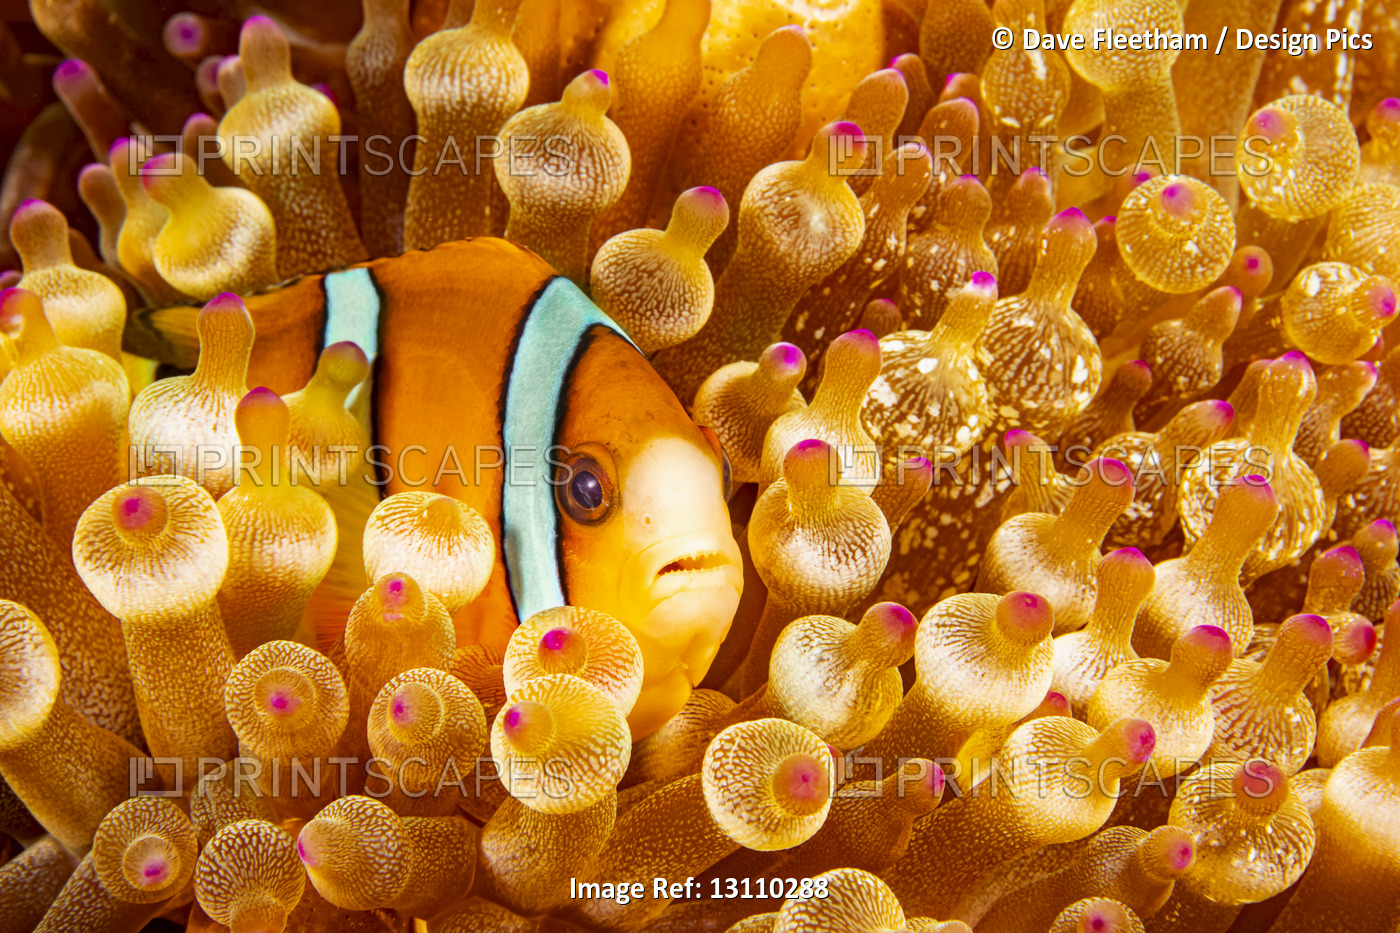 This Orange-fin anemonefish (Amphiprion chrysopterus) is pictured hiding in ...